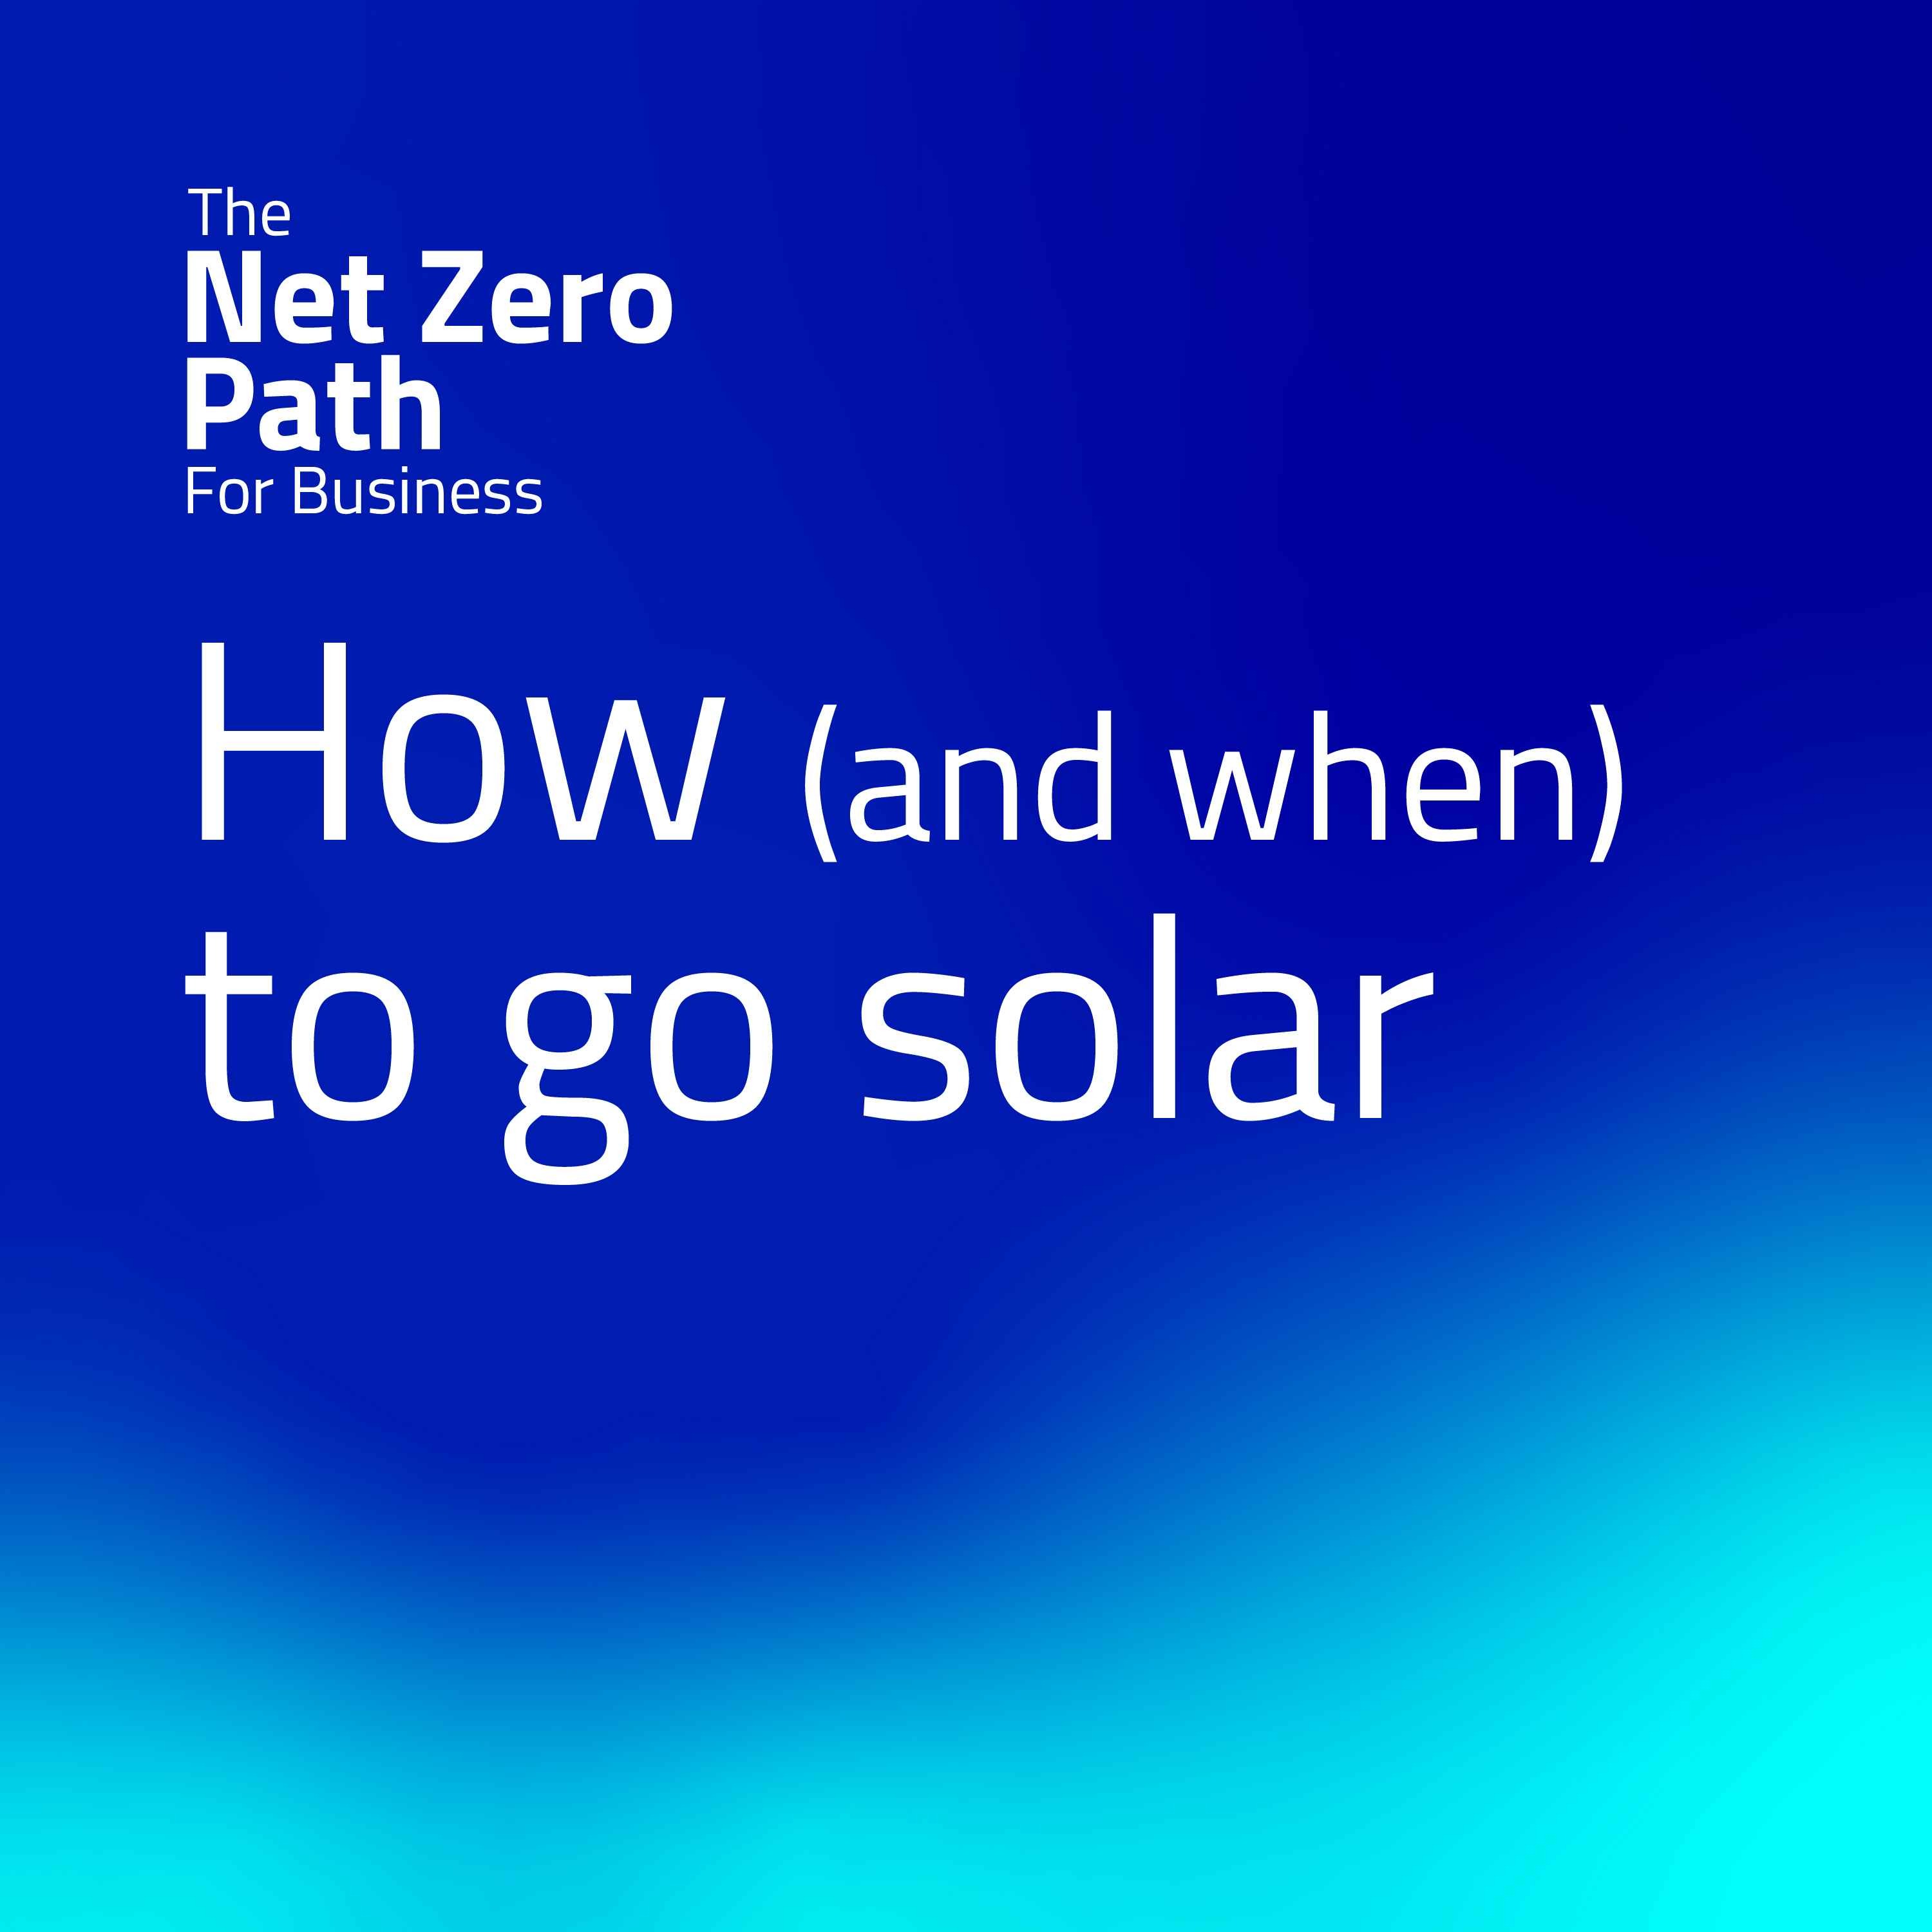 3. How (and when) to go solar